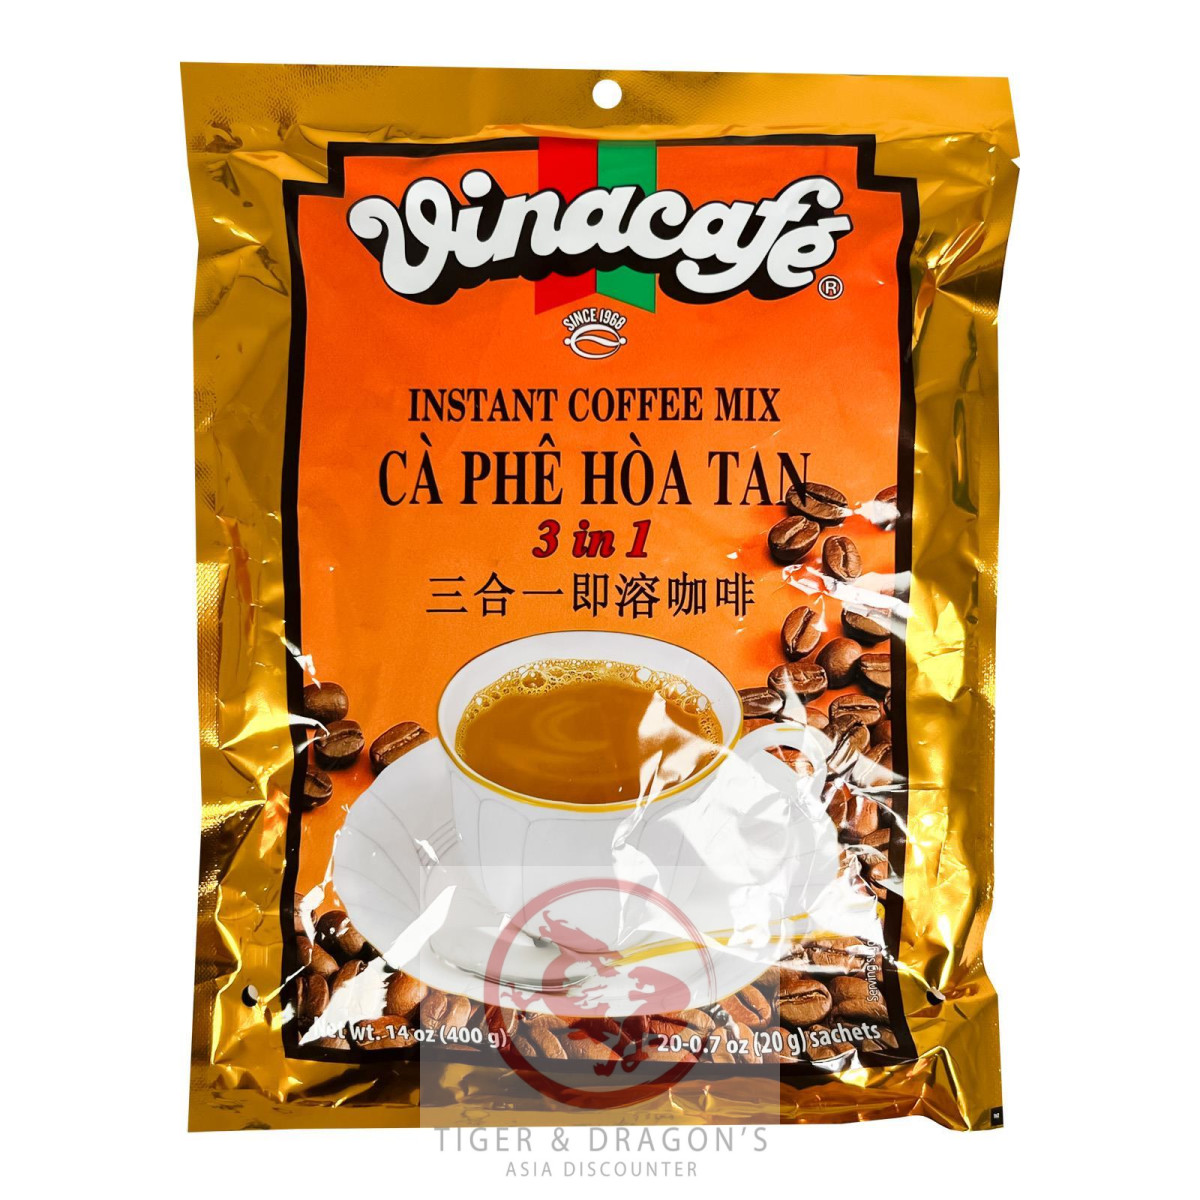 Vinacafe Instant Kaffee Mix 3in1 400g